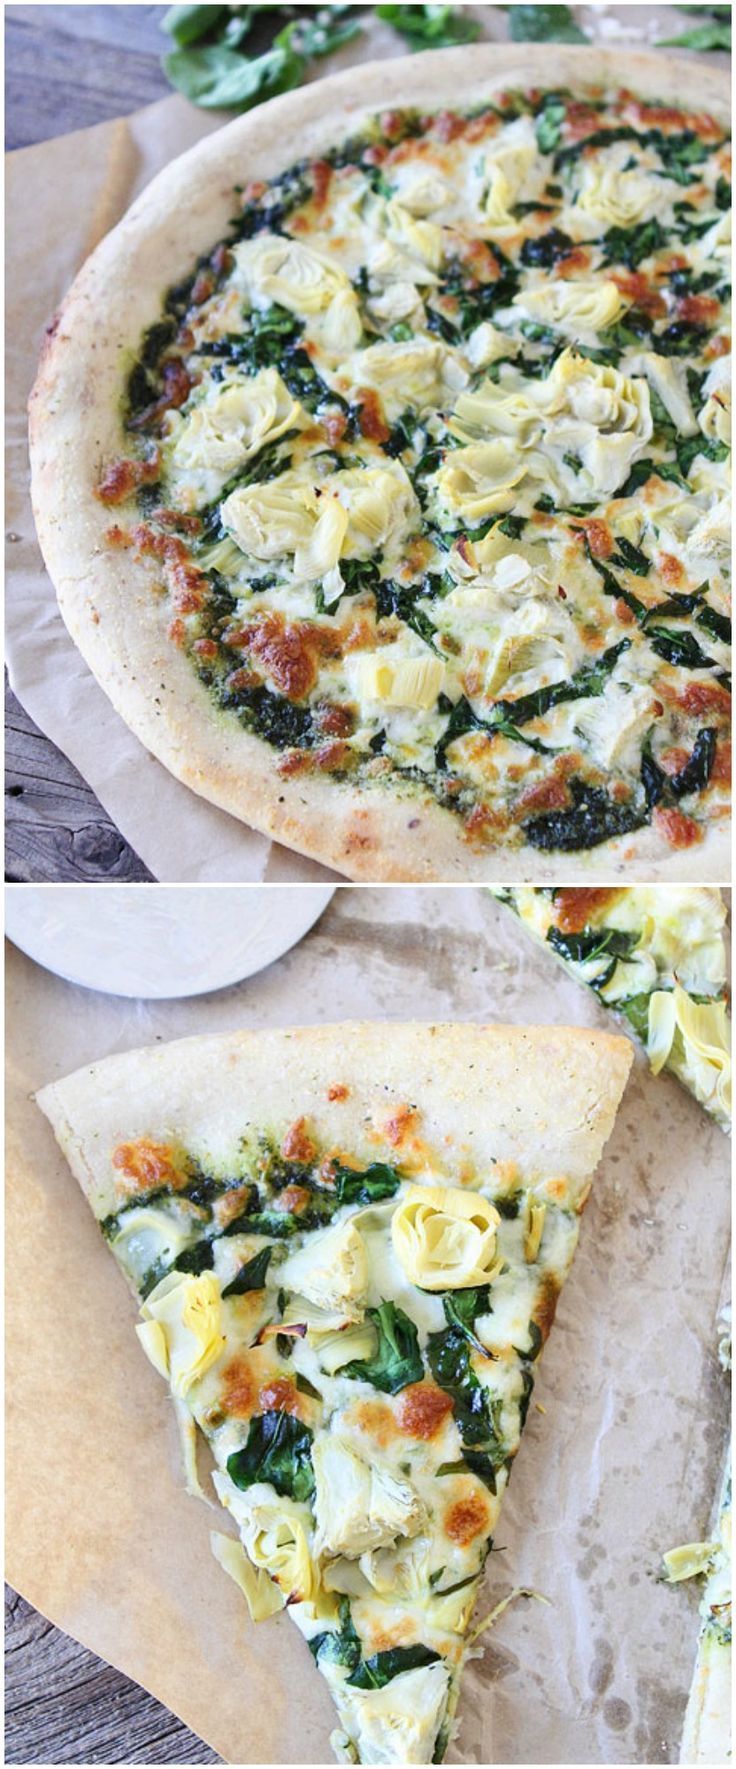 PIZZA! This Spinach Artichoke Pesto Pizza on twopeasandtheirpo… is an all time favorite! Check it out along with the rest of